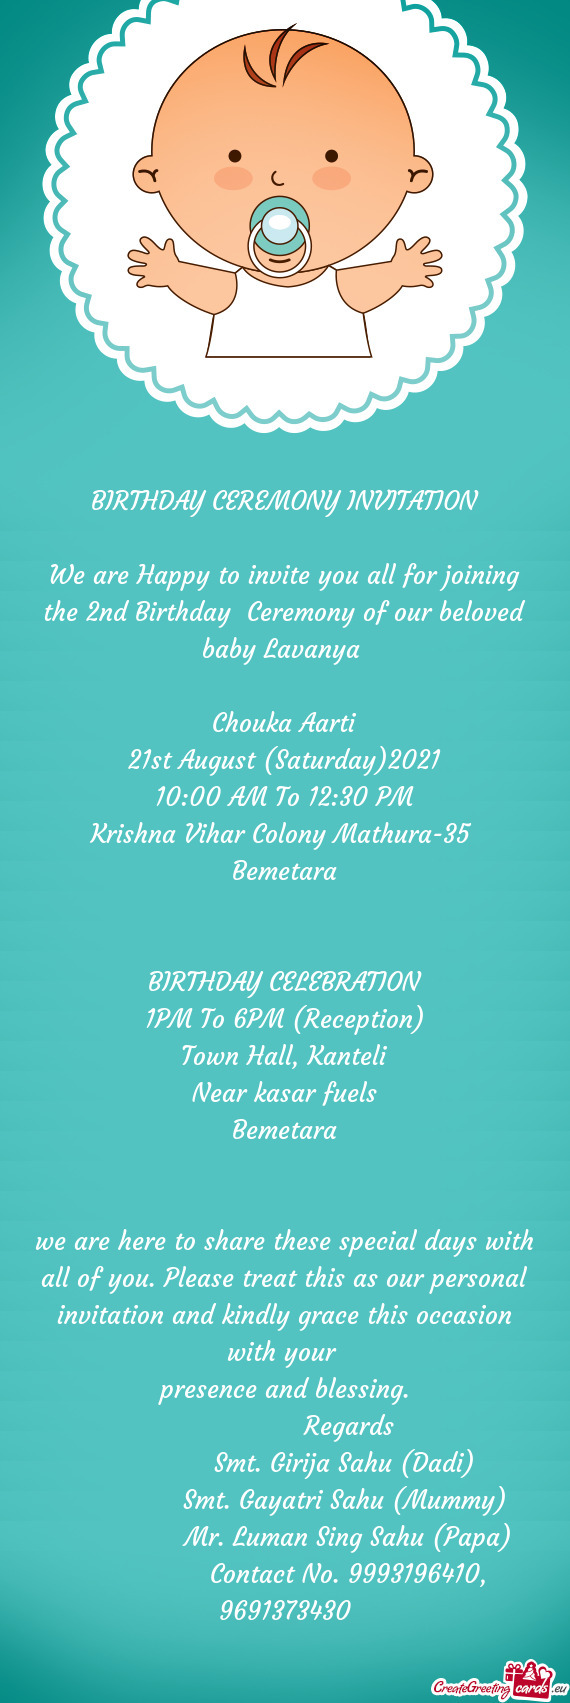 We are Happy to invite you all for joining the 2nd Birthday Ceremony of our beloved baby Lavanya